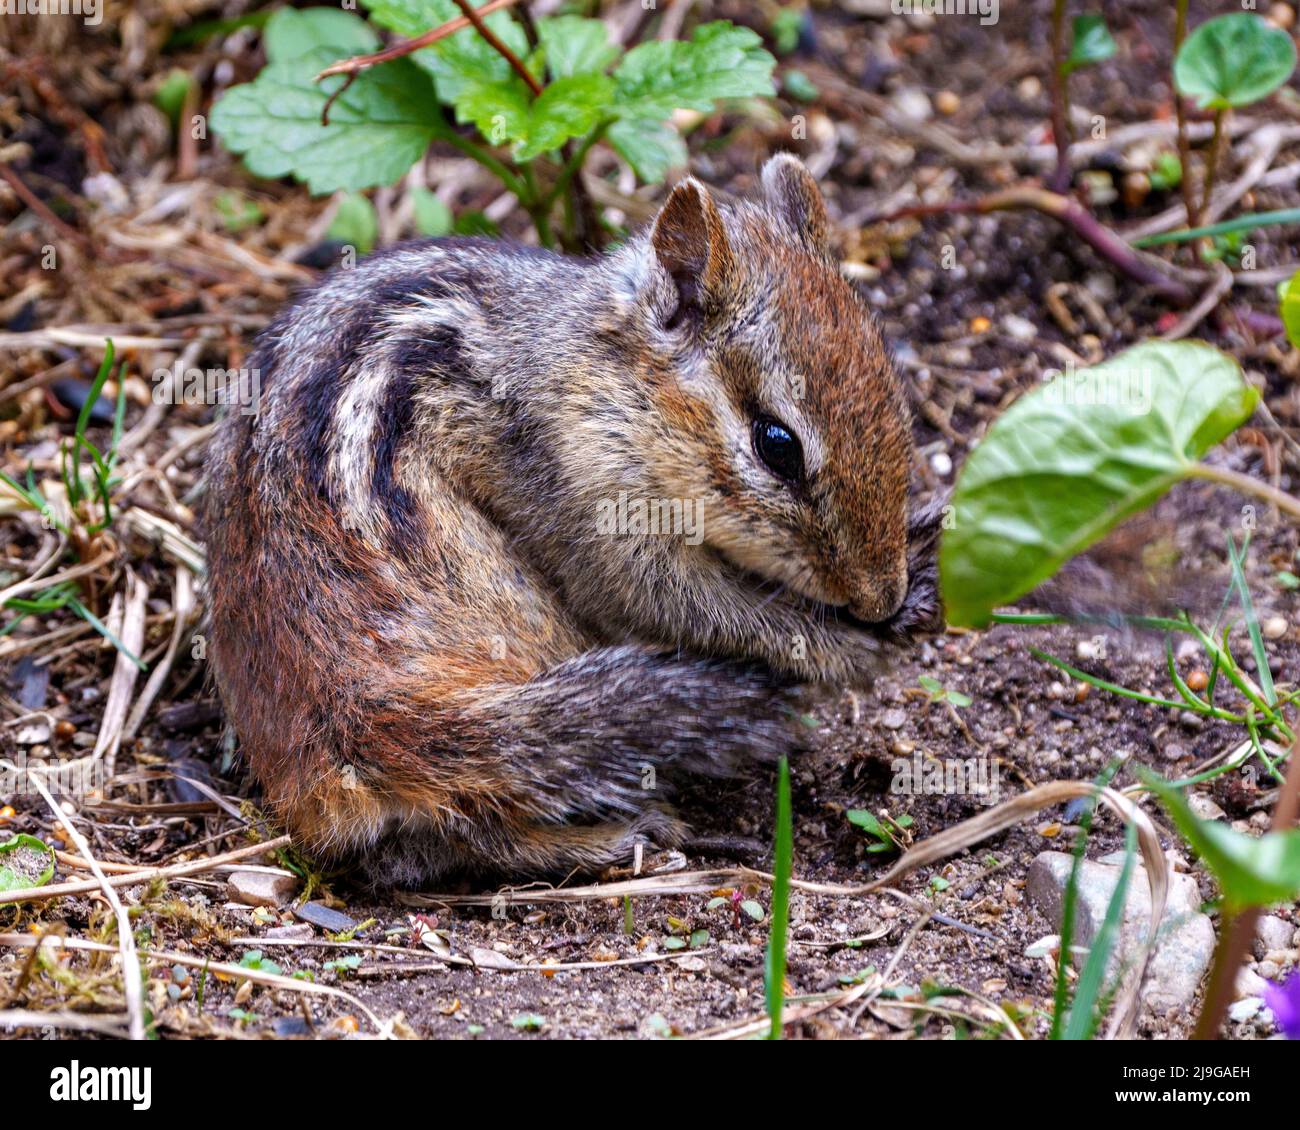 Chipmunk animal in the field cleaning its tail and displaying brown fur, body, head, eye, nose, ears, paws, in its environment and habitat environment Stock Photo